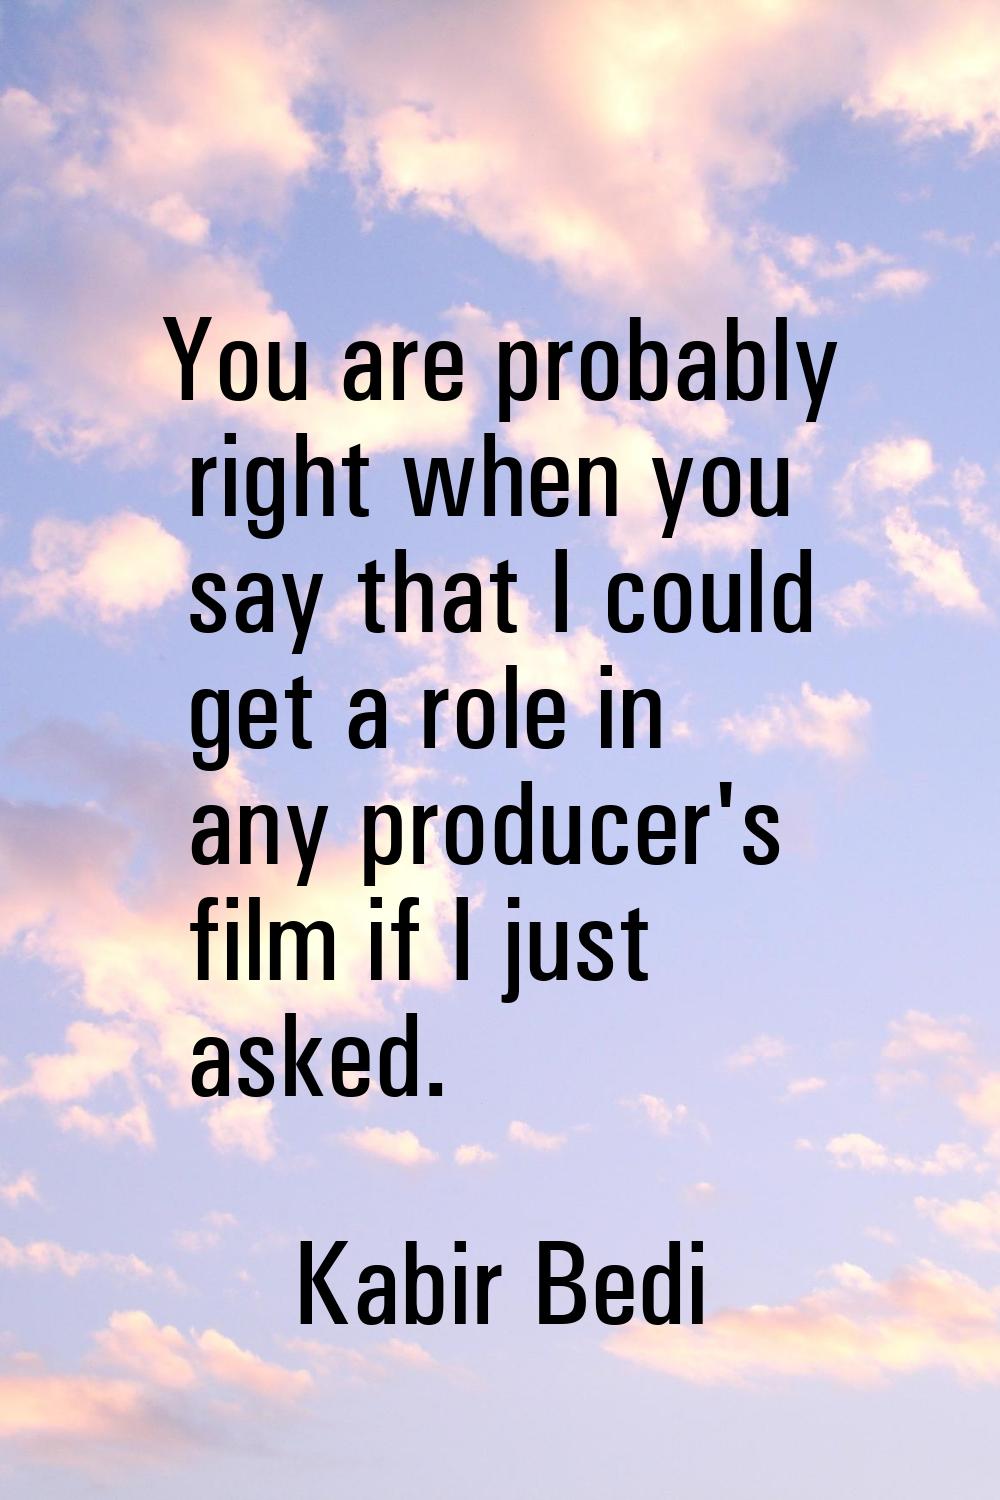 You are probably right when you say that I could get a role in any producer's film if I just asked.